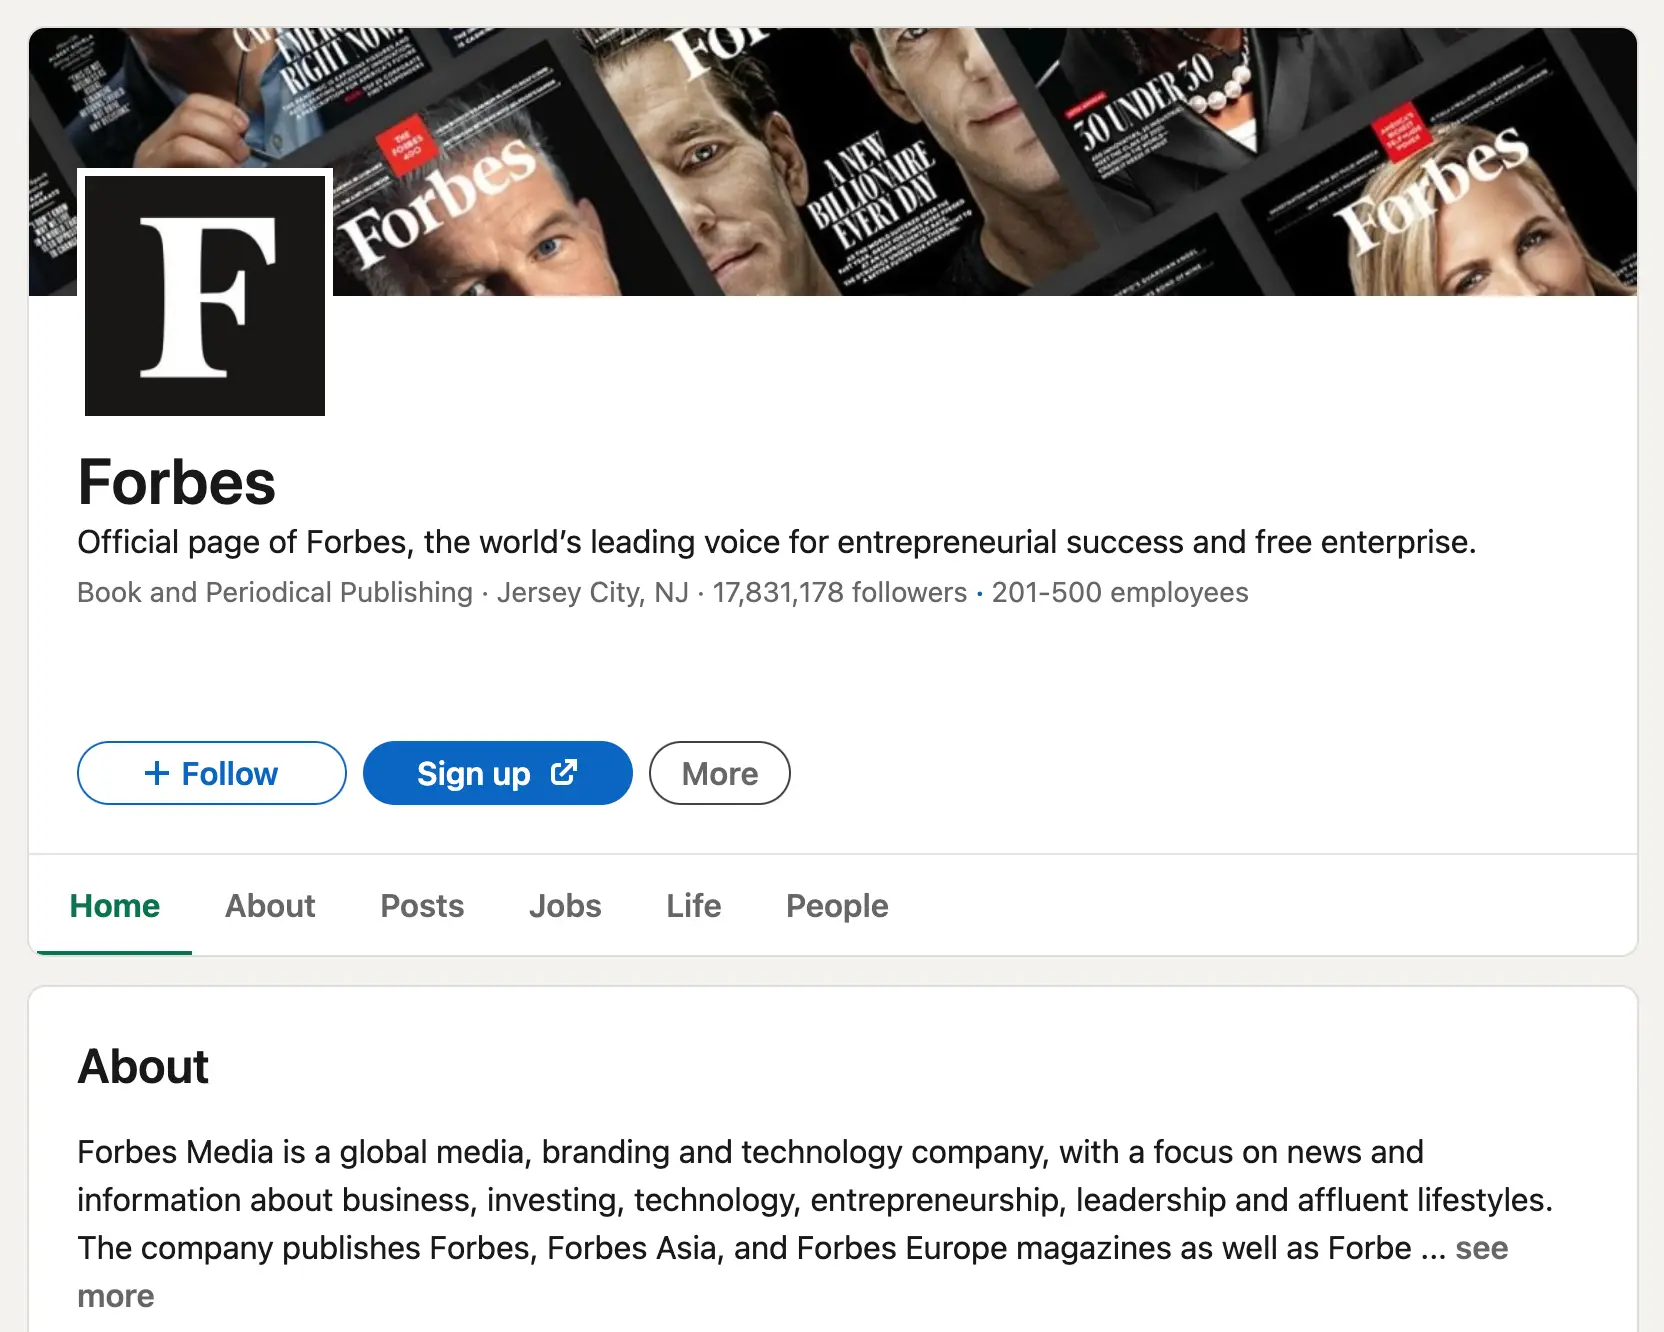 Screenshot of LinkedIn page for Forbes